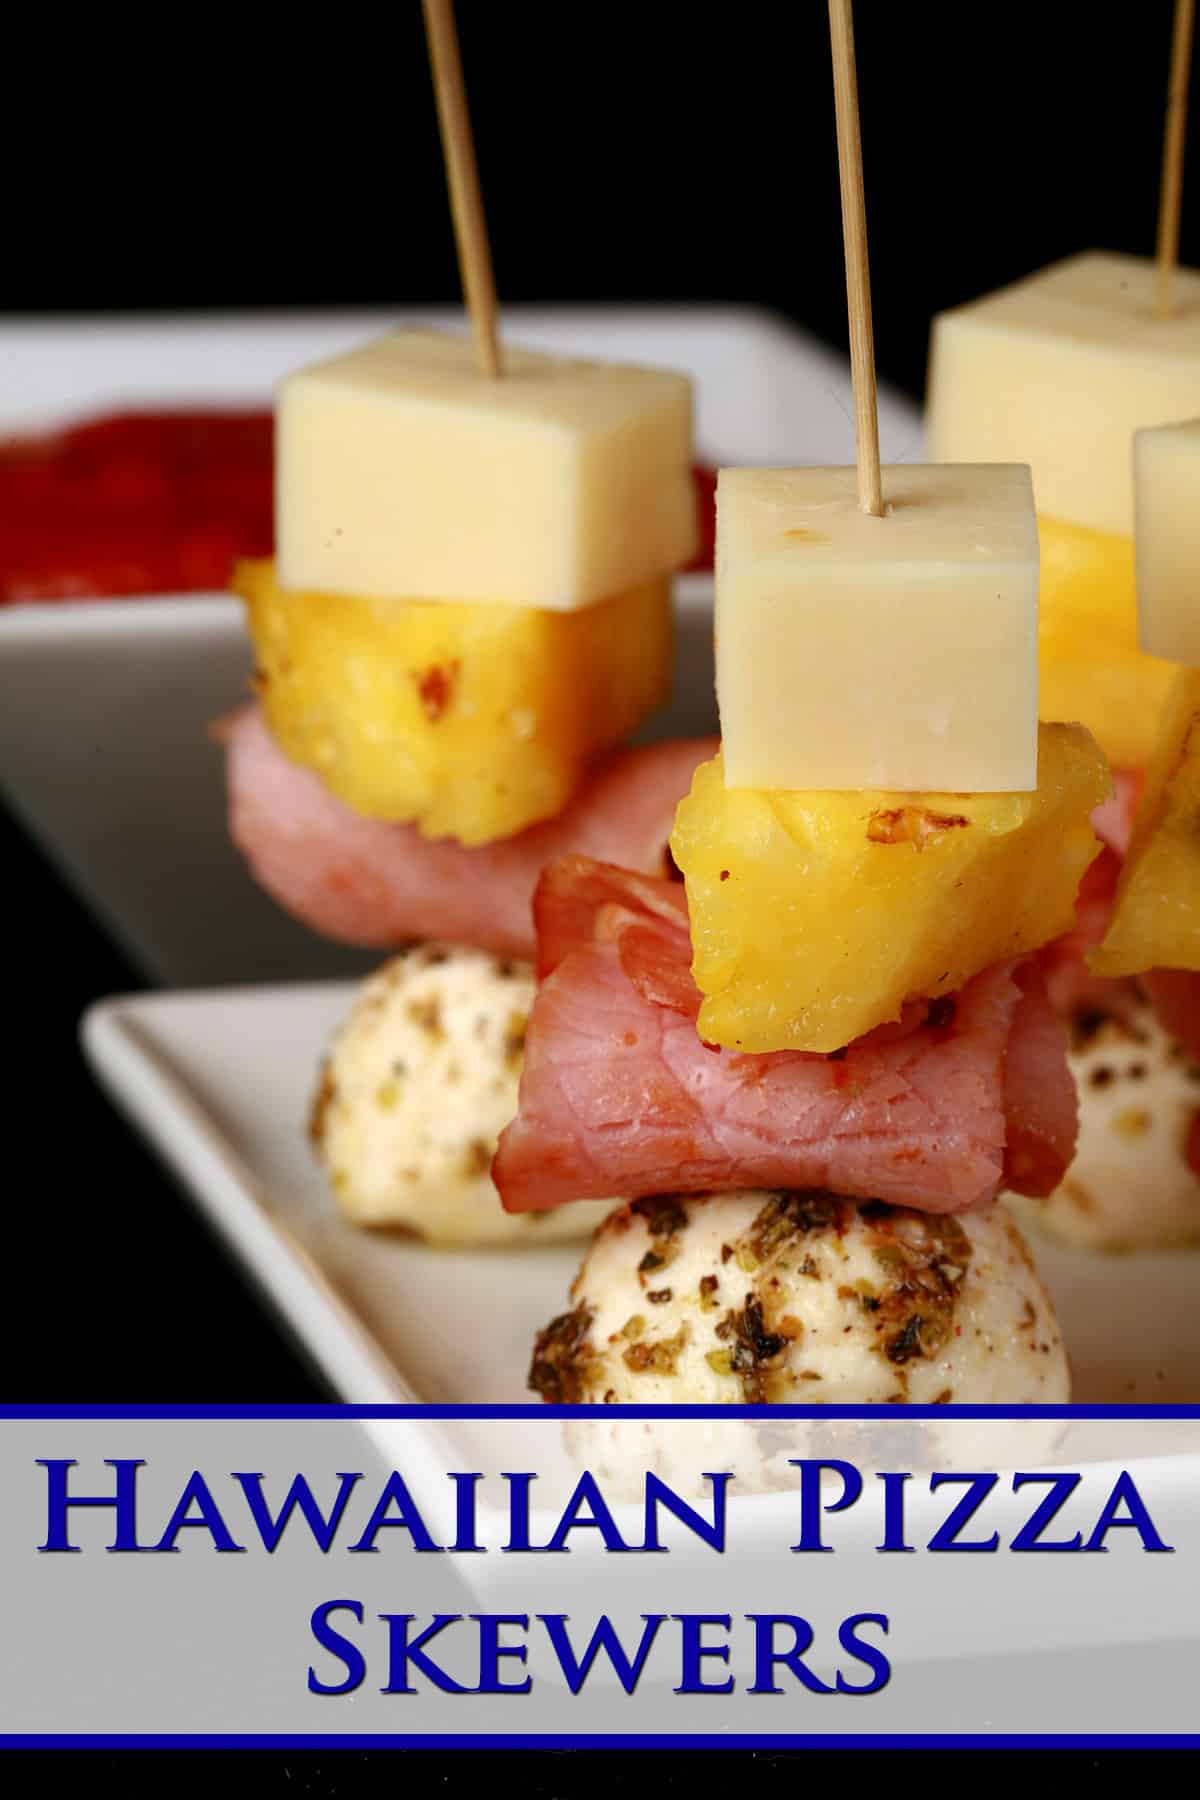 A tray of hawaiian pizza themed ham and pineapple skewers.